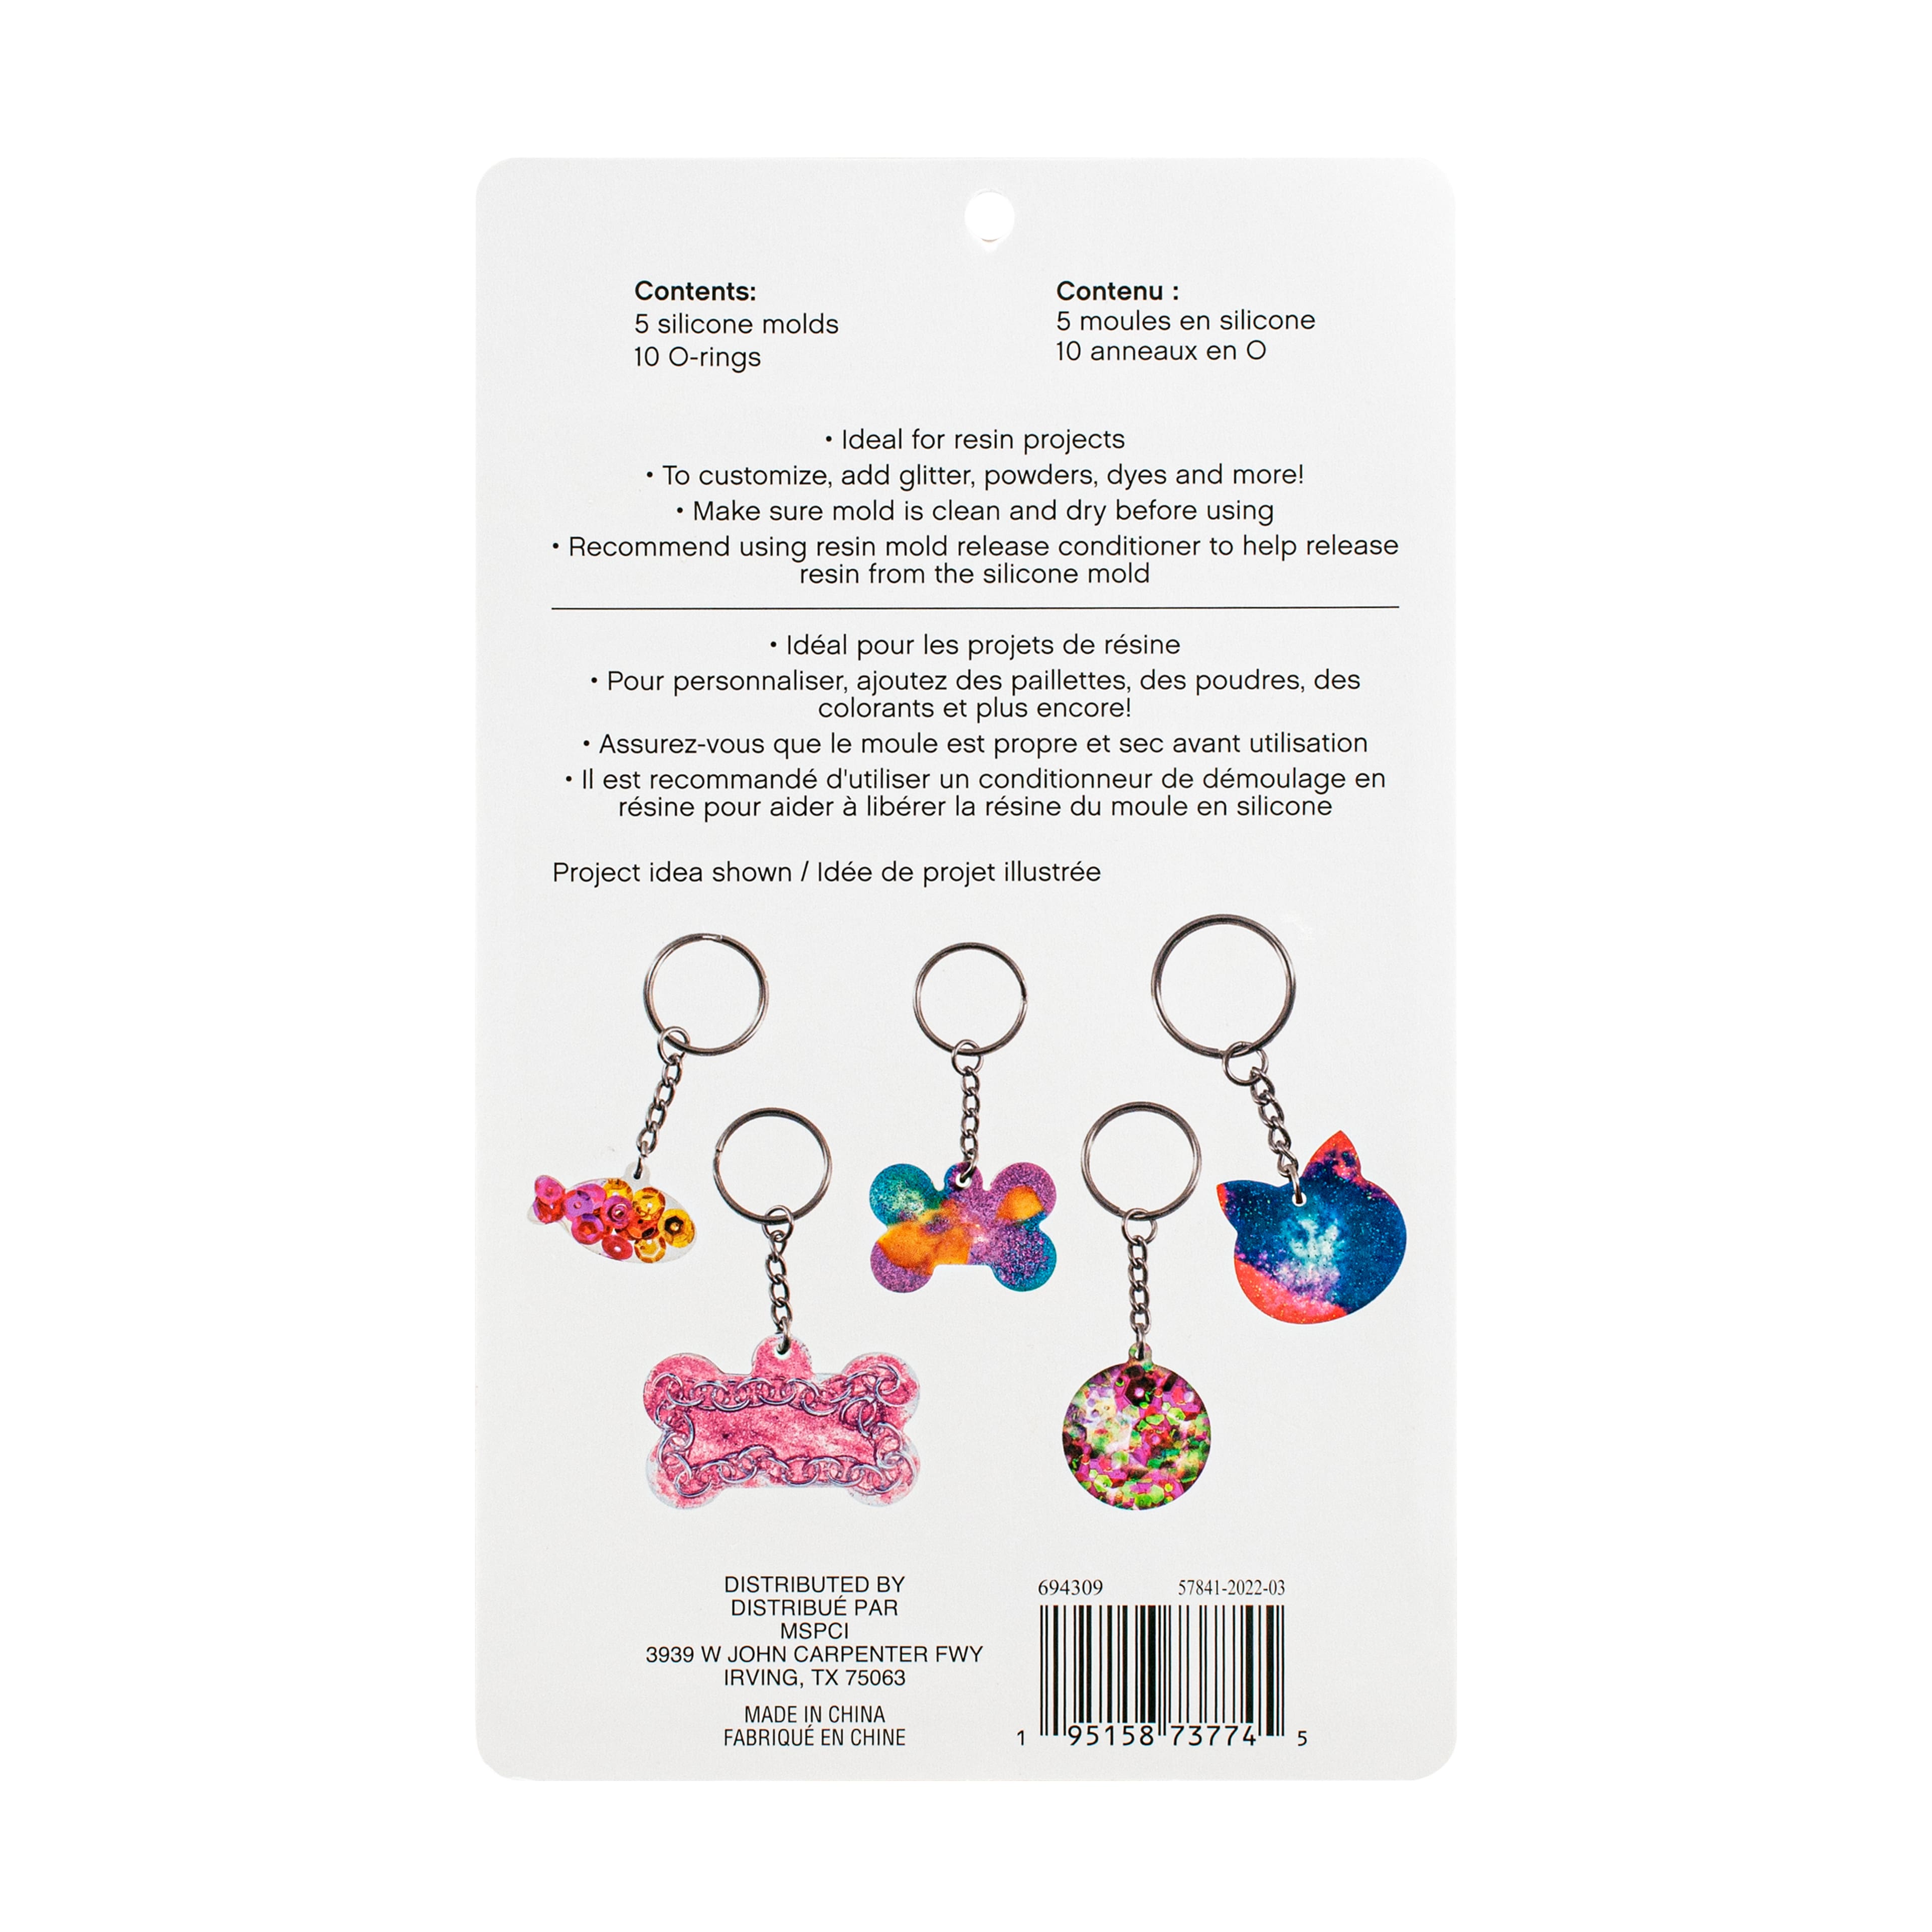 Pet Tag Silicone Mold Set by Craft Smart&#xAE;